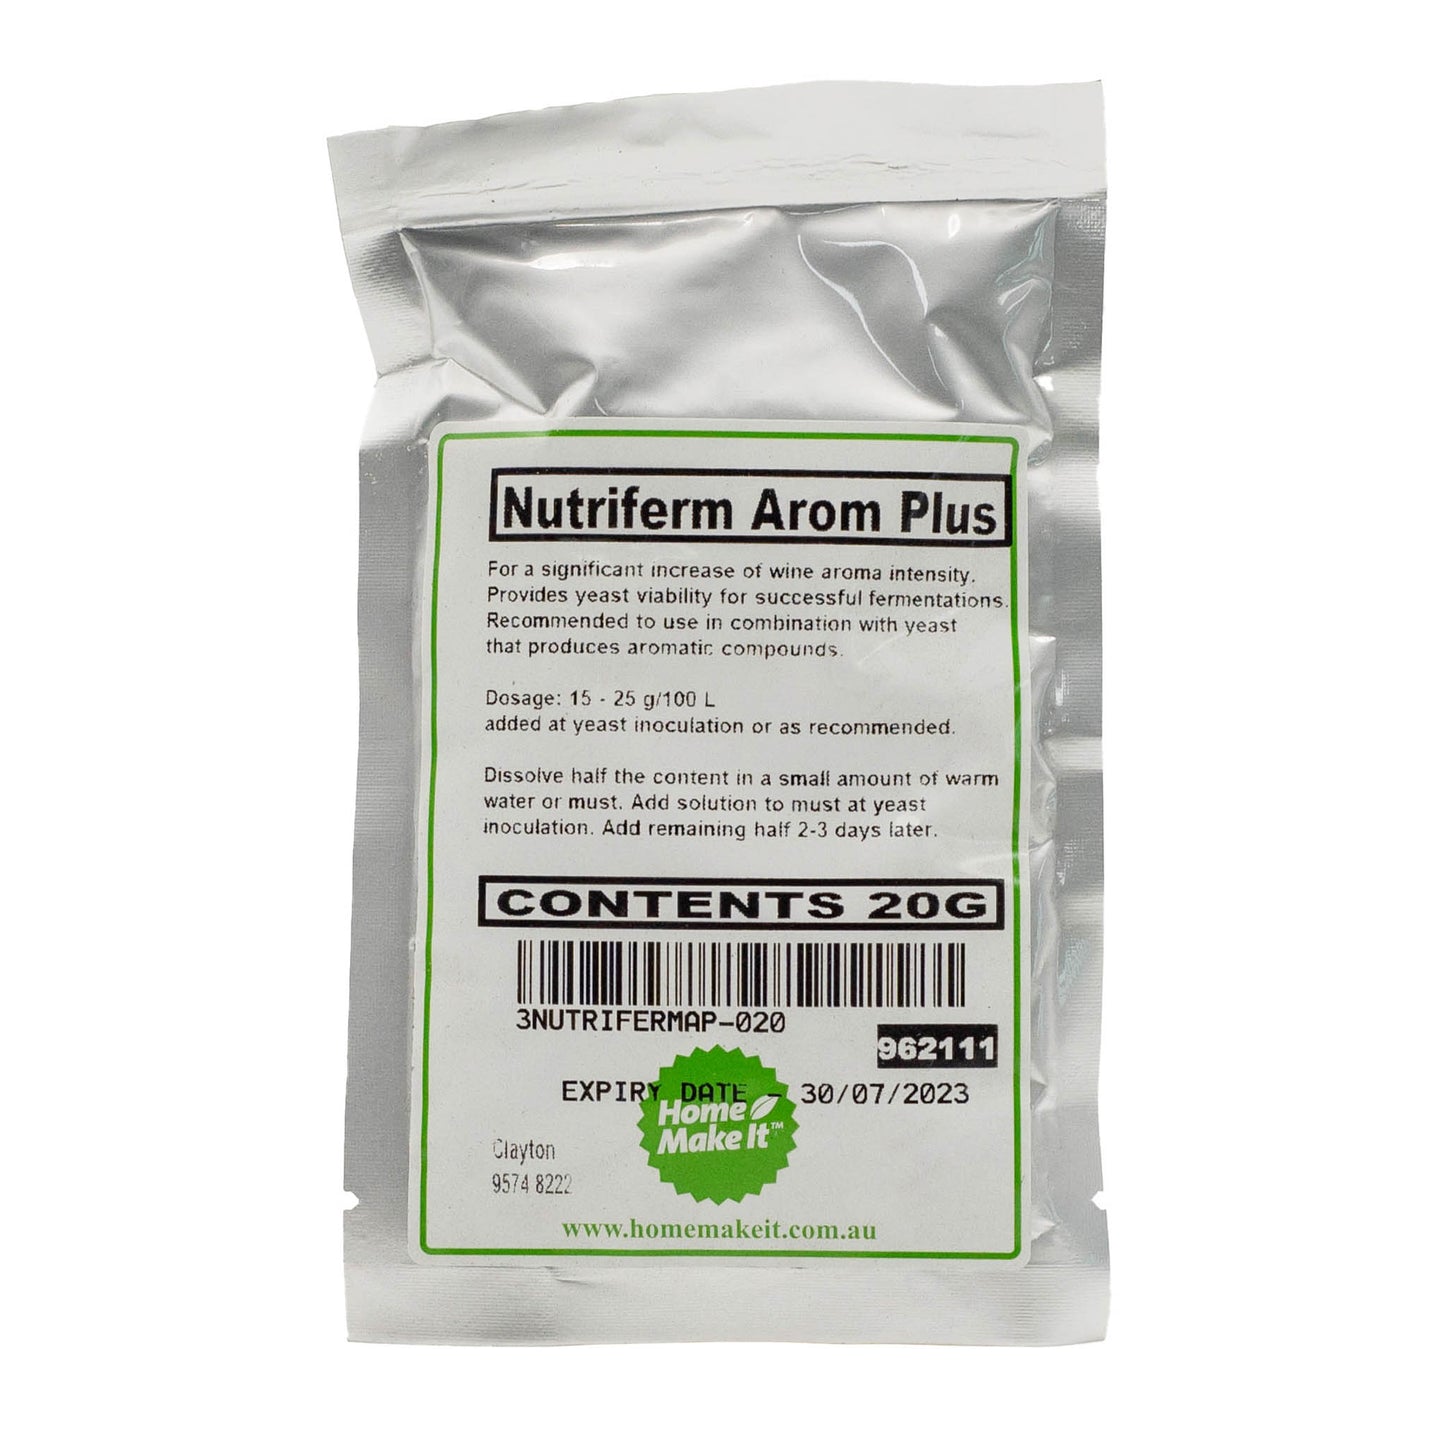 20g packet of nutriferm arom plus for increasing wine aroma intensity and yeast viability.